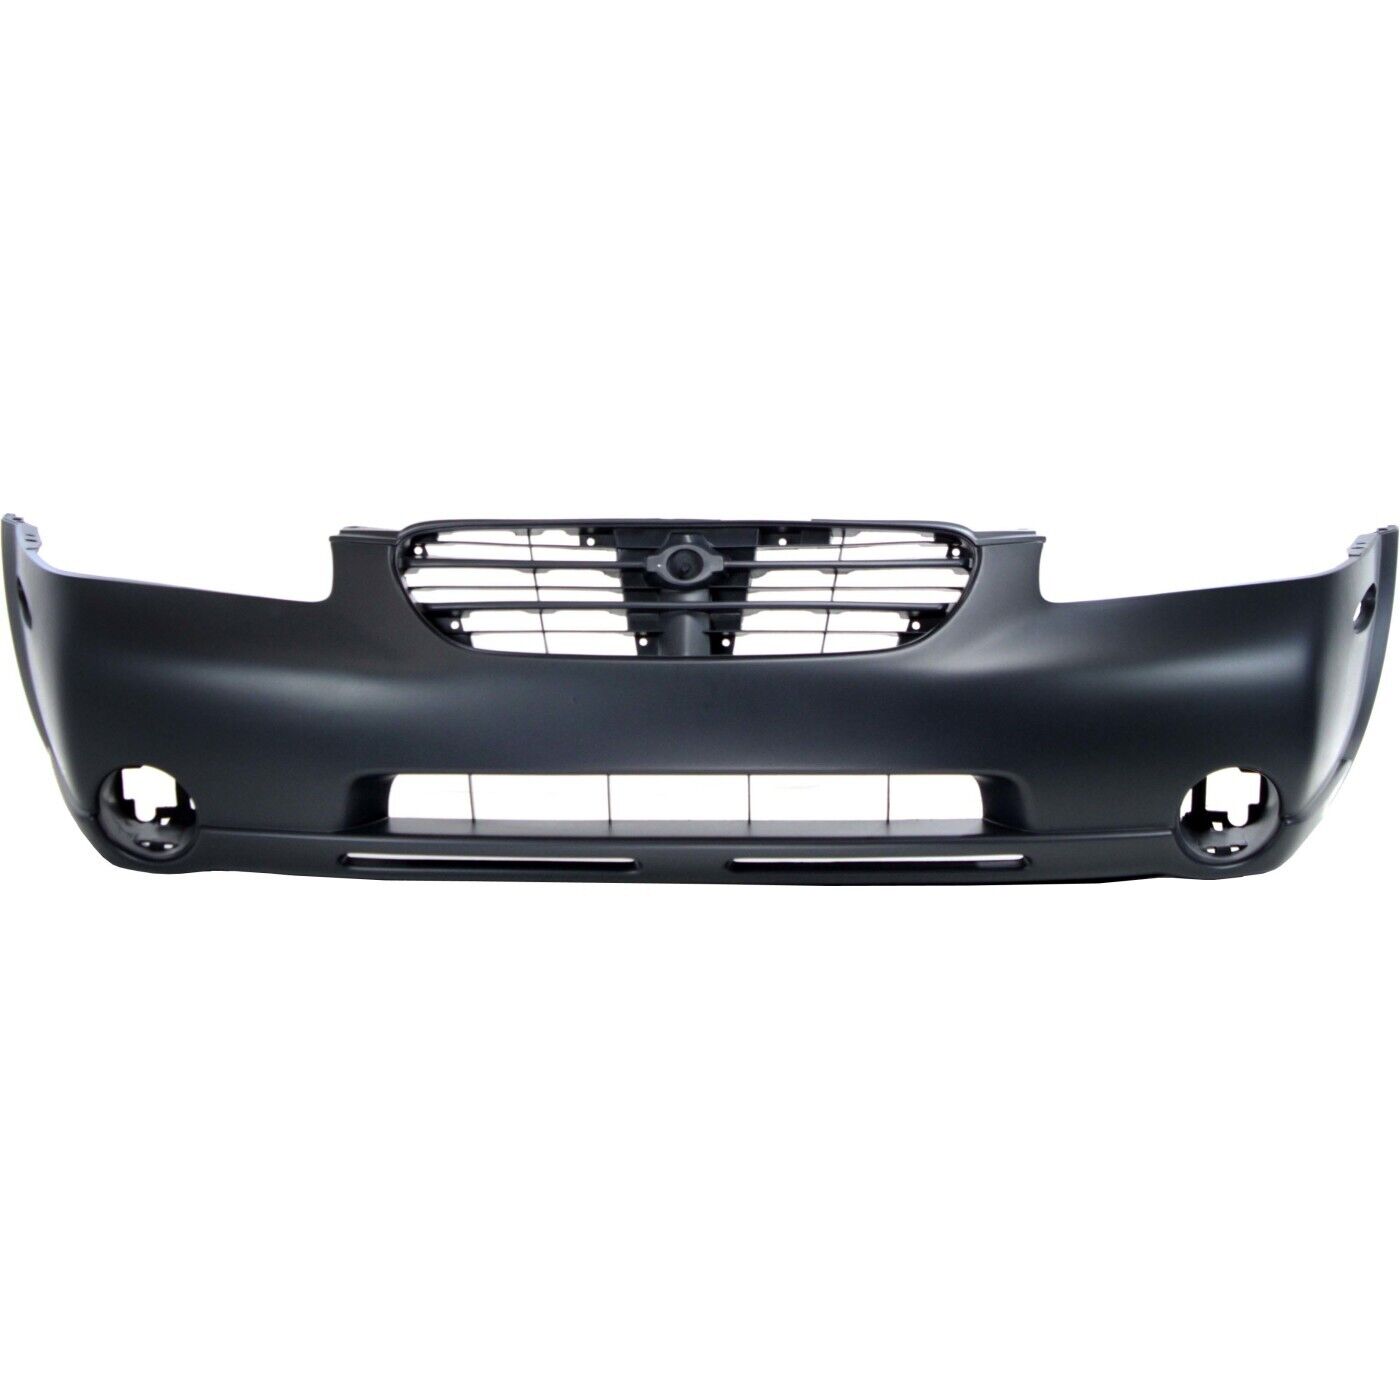 Front Bumper Cover For 2000-2001 Nissan Maxima w/ fog lamp holes Primed